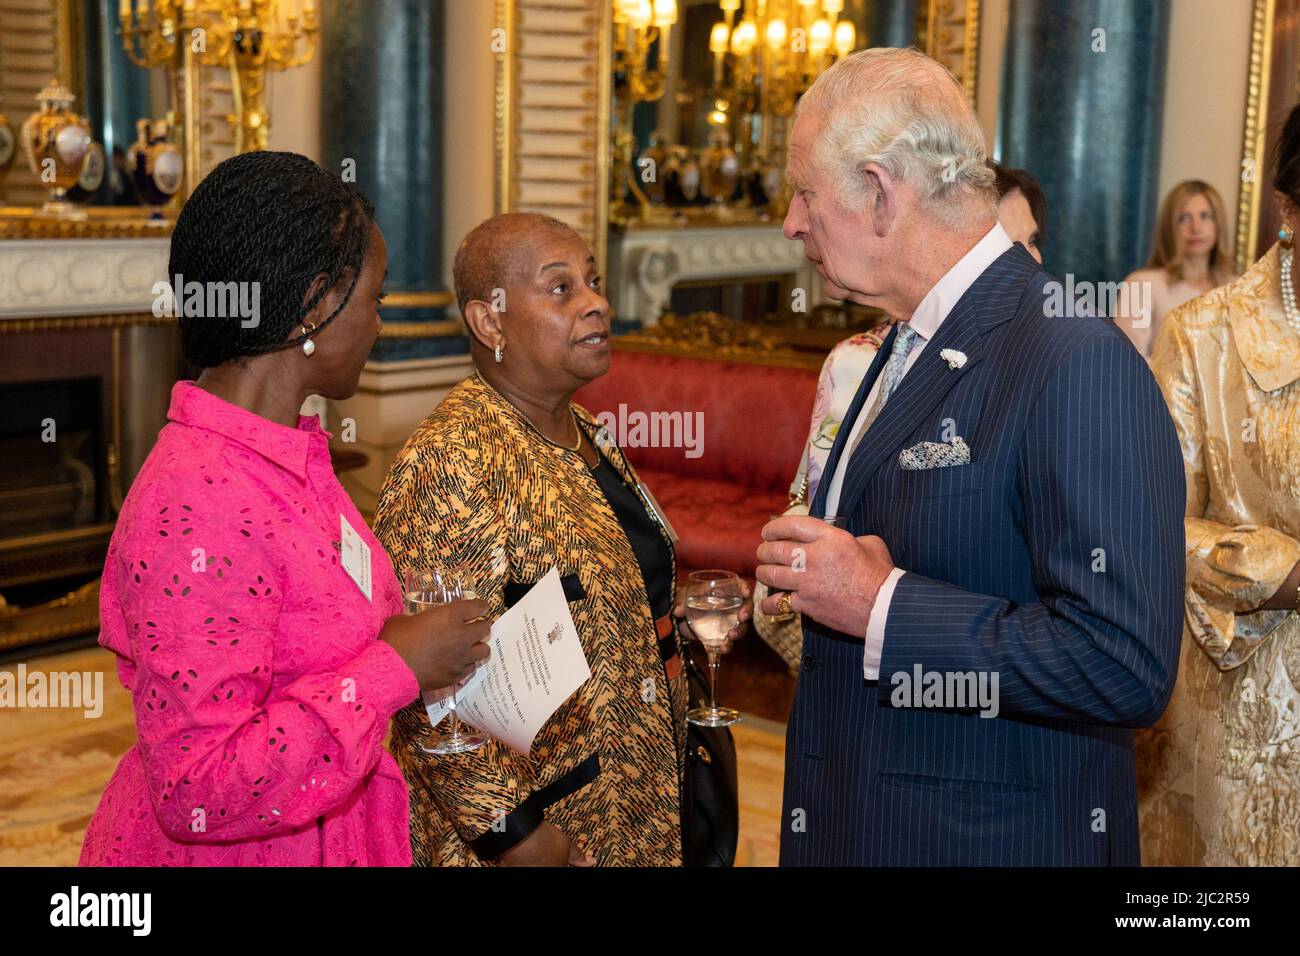 Britain's Prince Charles speaks with Baroness Doreen Lawrence, while he attends a reception celebrating the Commonwealth Diaspora of the United Kingdom, in London, Britain, June 9, 2022. Dominic Lipinski/PA Wire/Pool via REUTERS Stock Photo